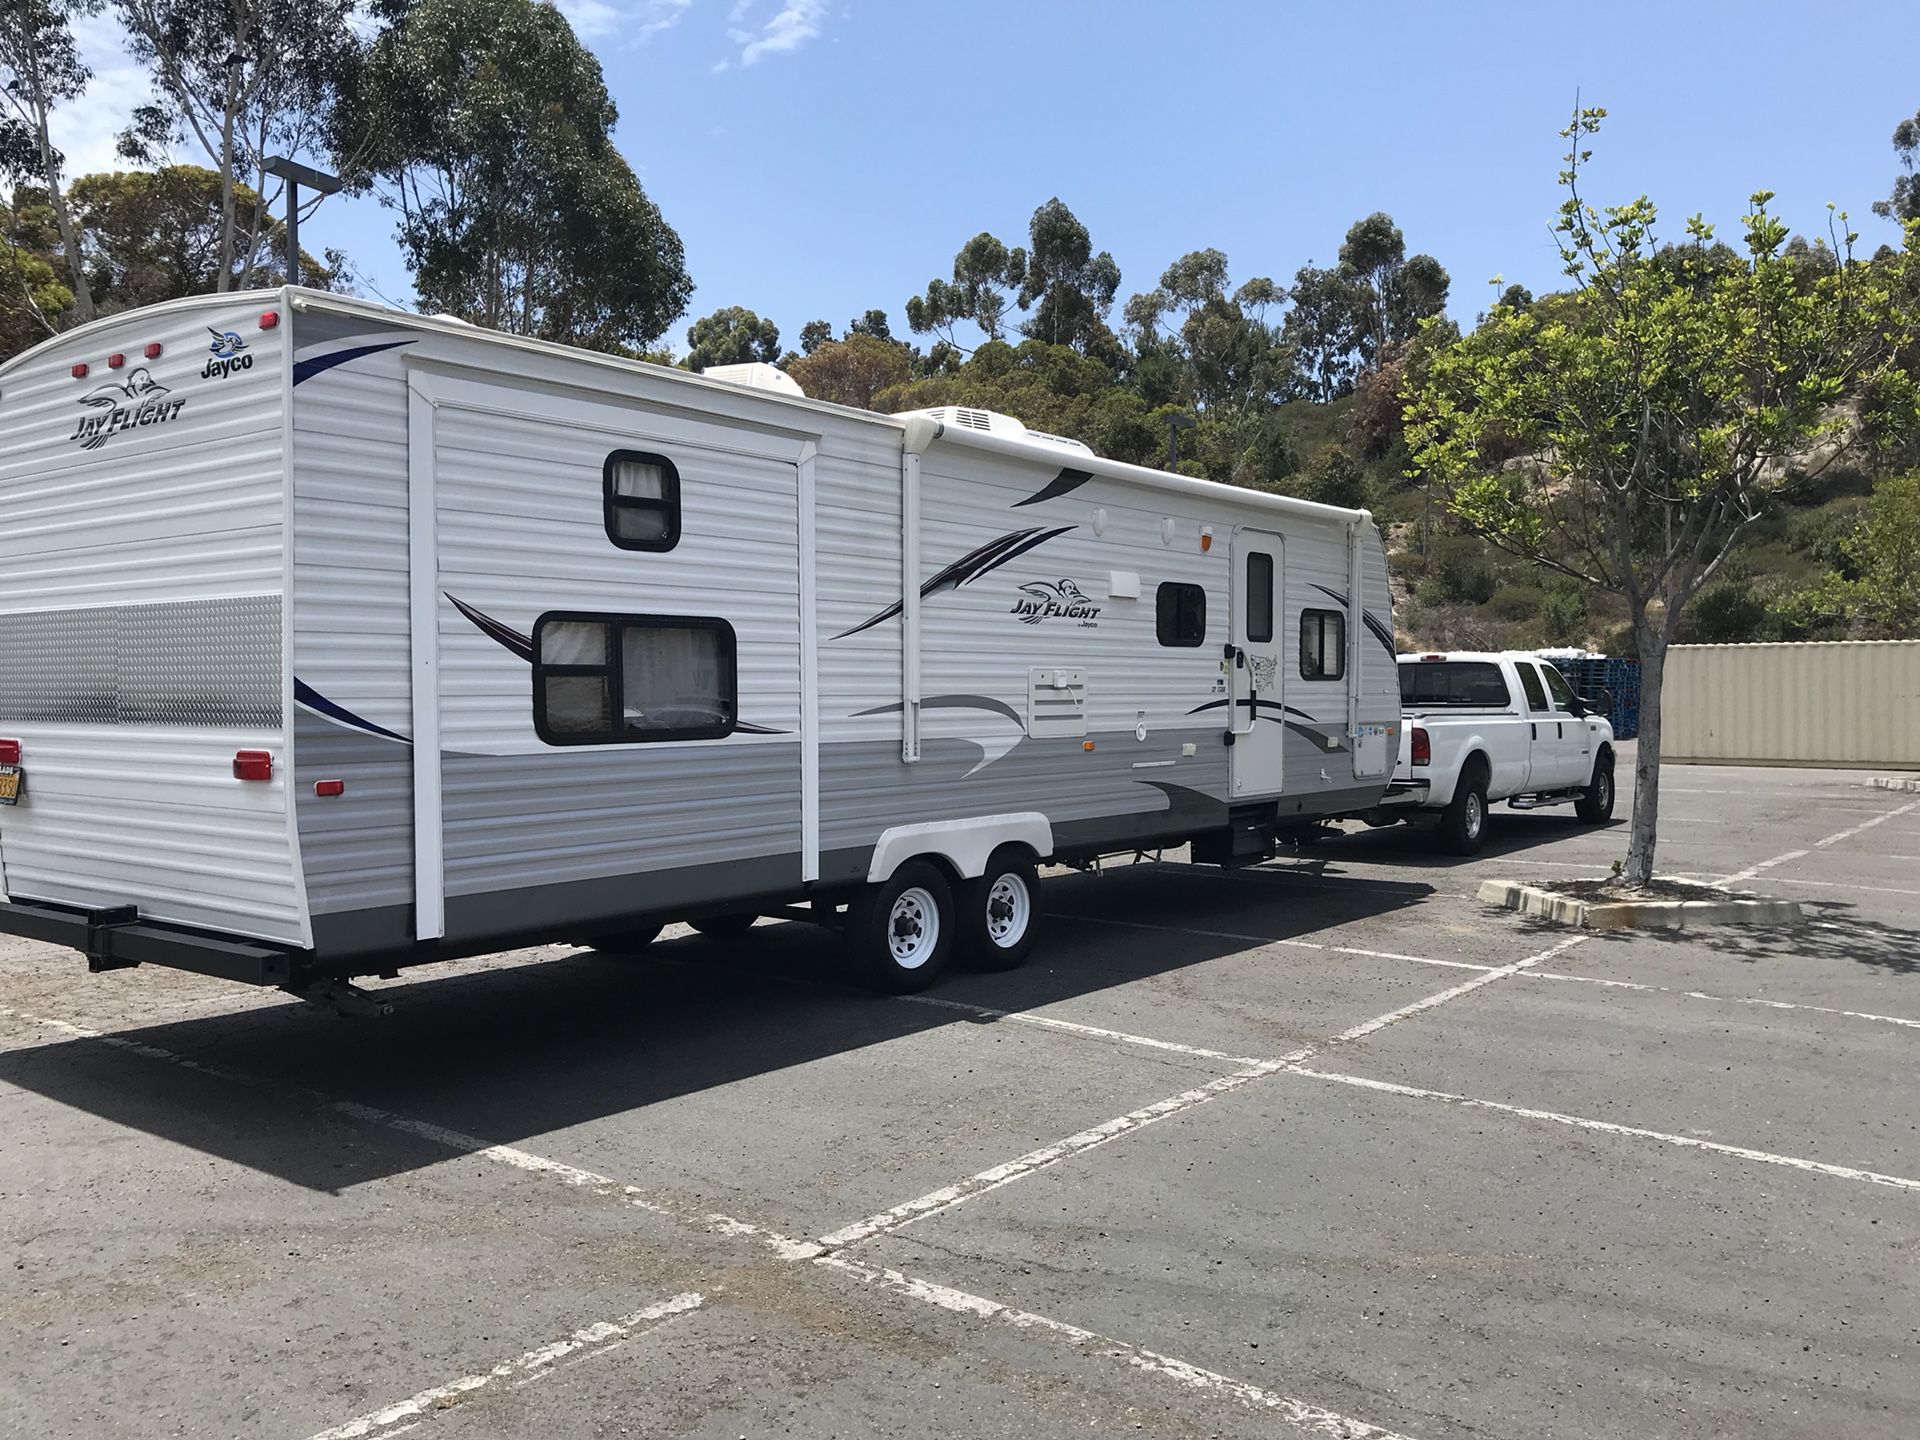 Fifth Wheel, Goose neck, Travel Trailer, Motorcycle Towing